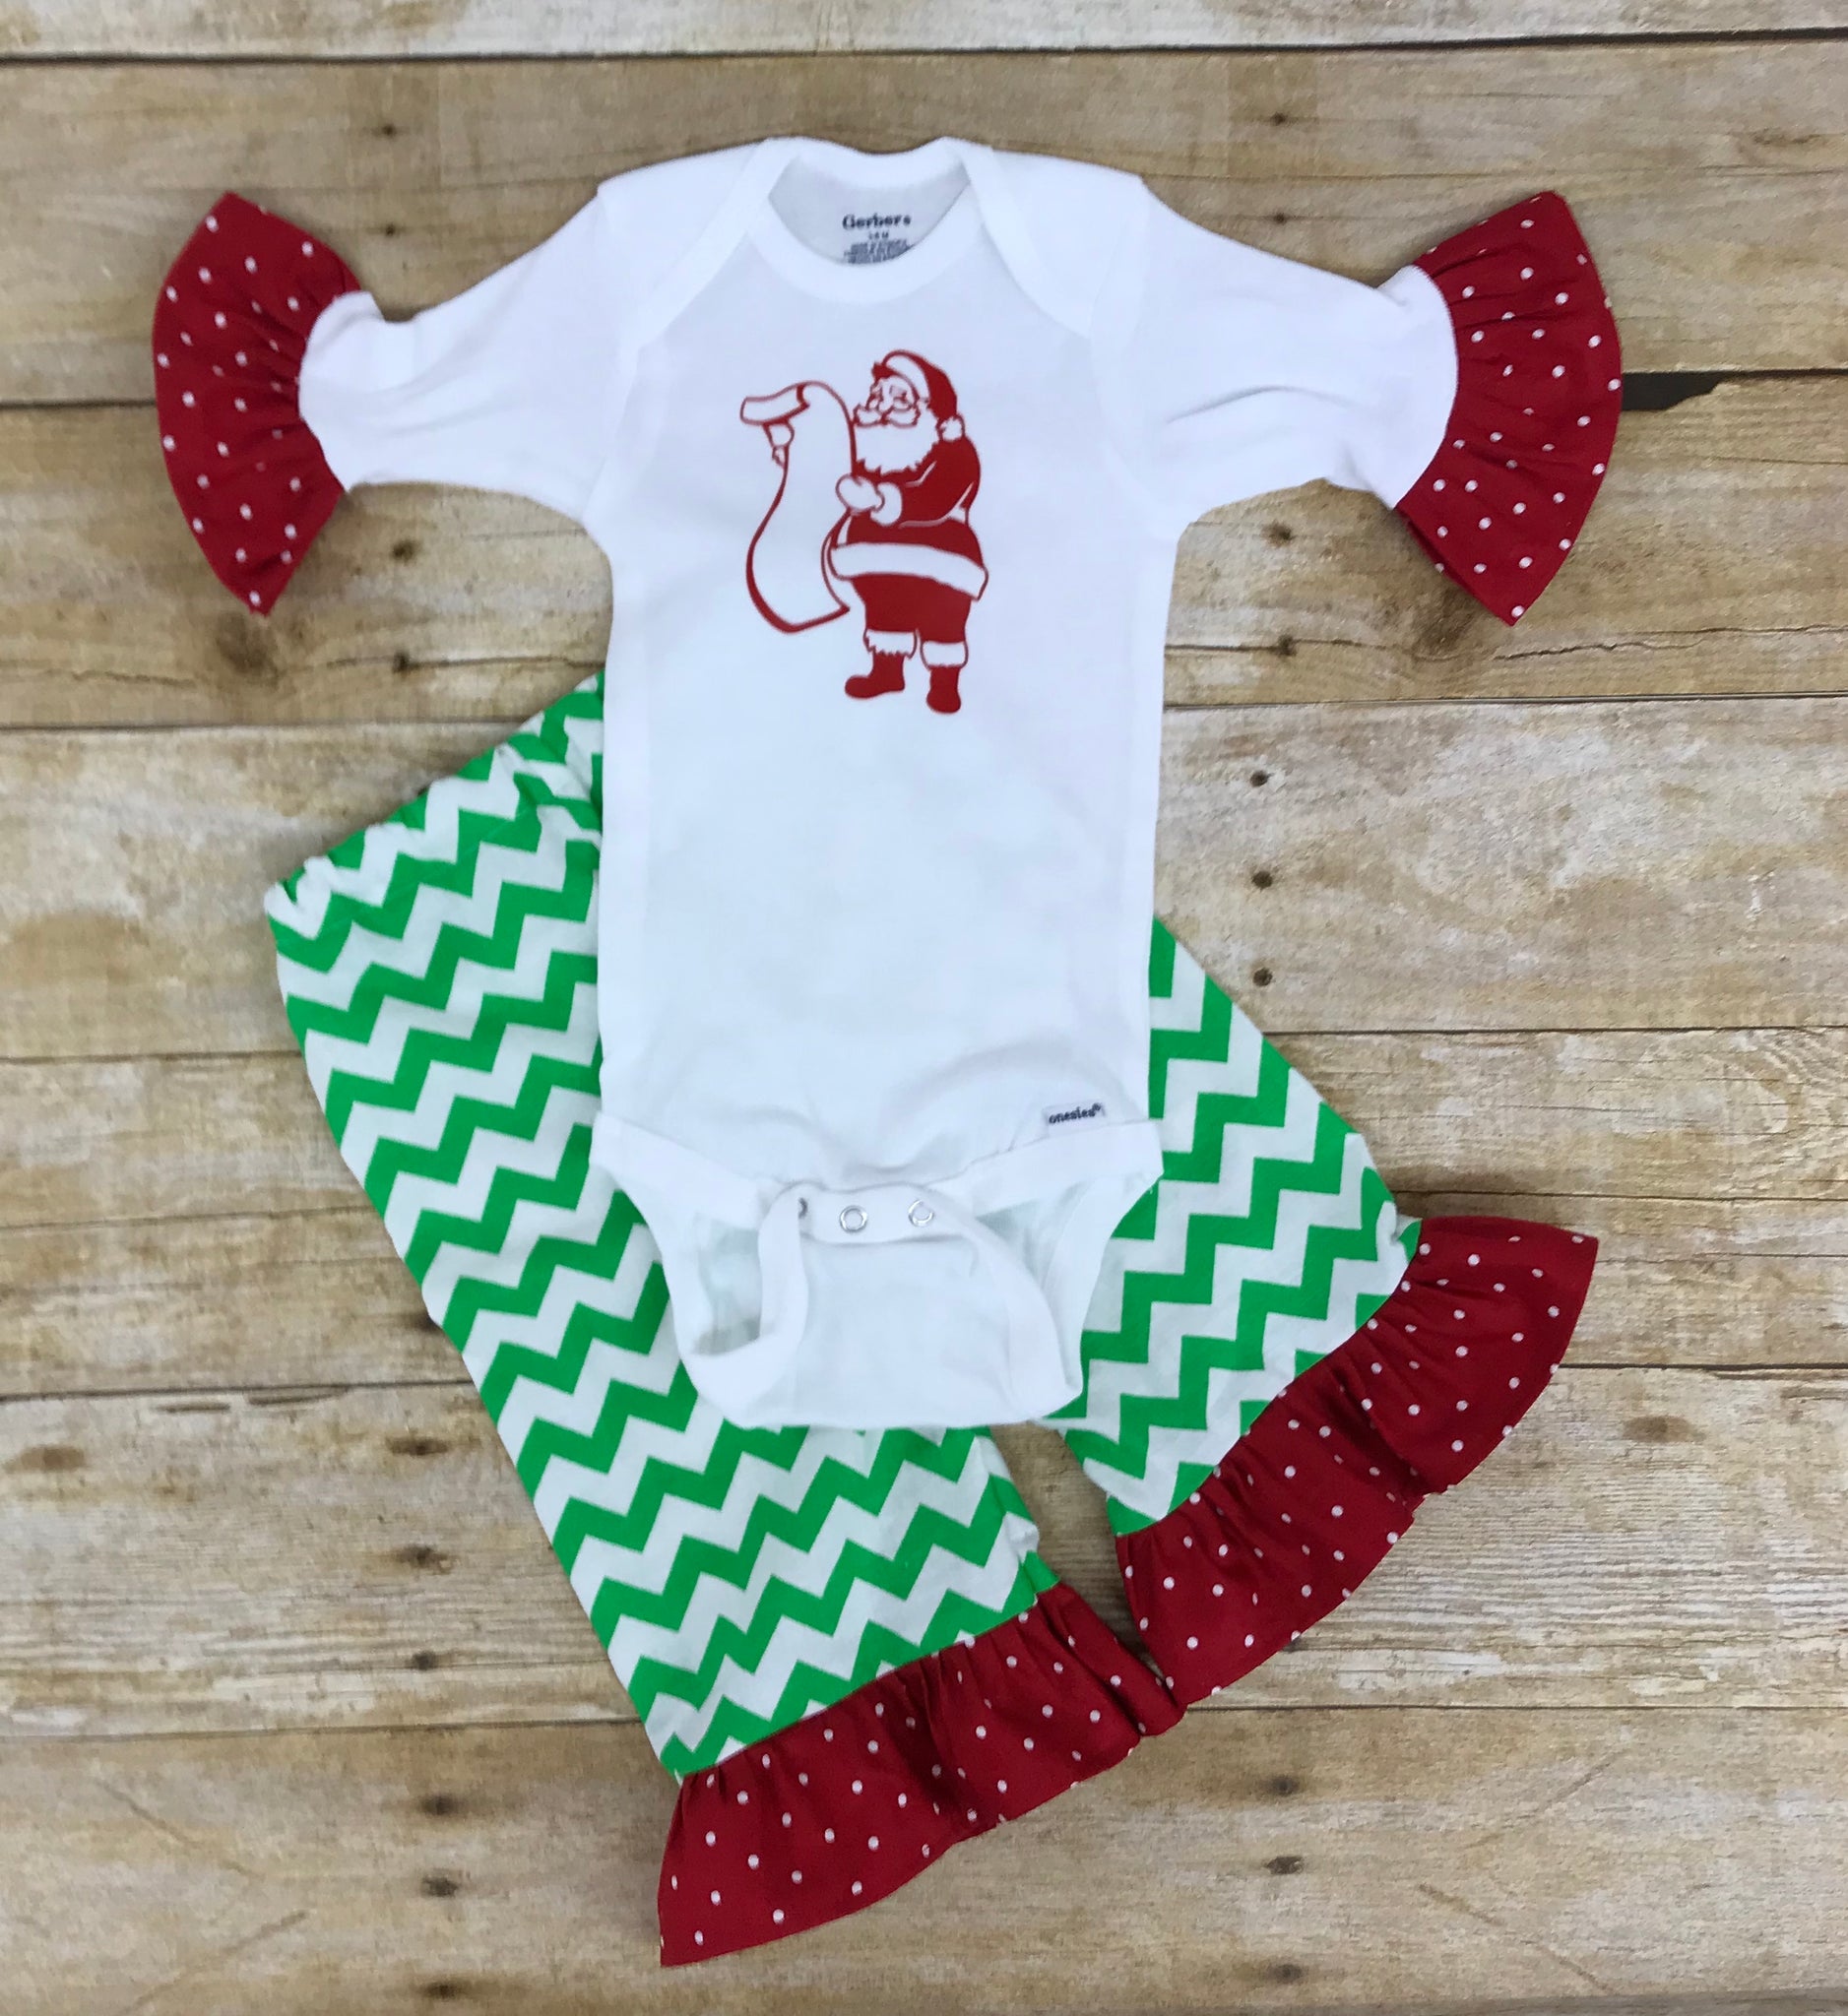 christmas ruffle outfit